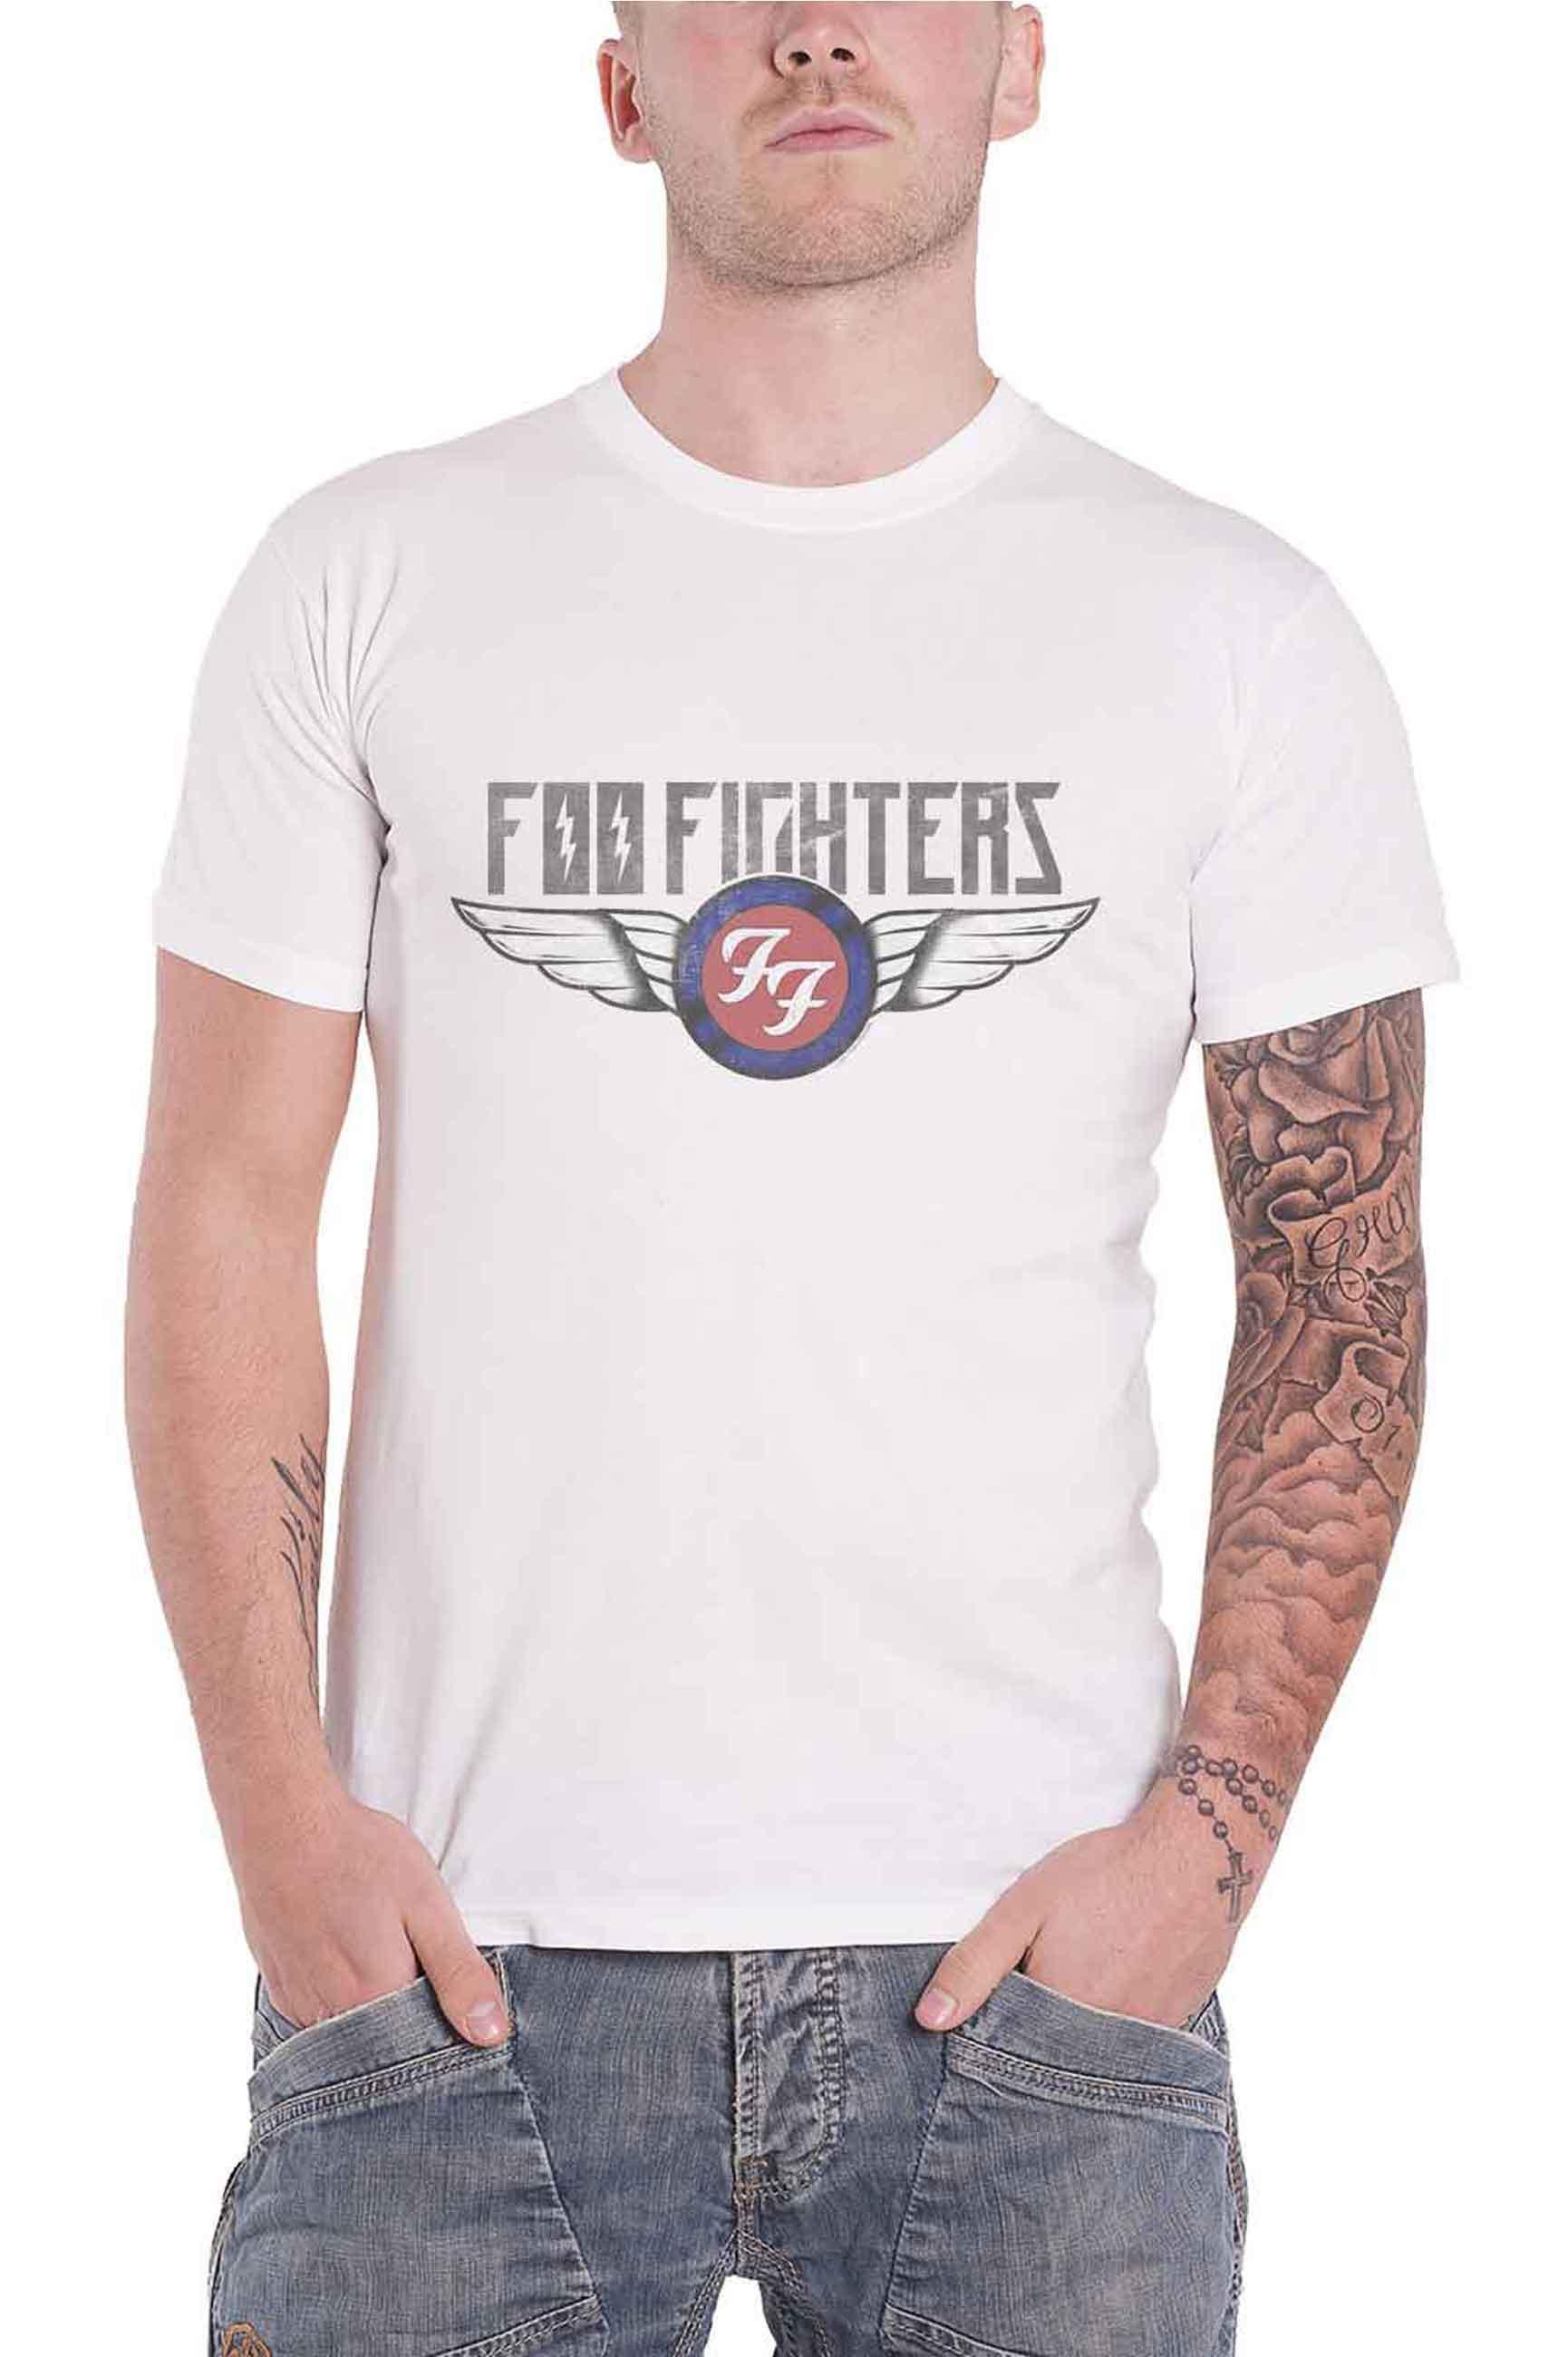 Foo Fighters T Shirt Flash Wings Band Logo distressed new Official Unisex White